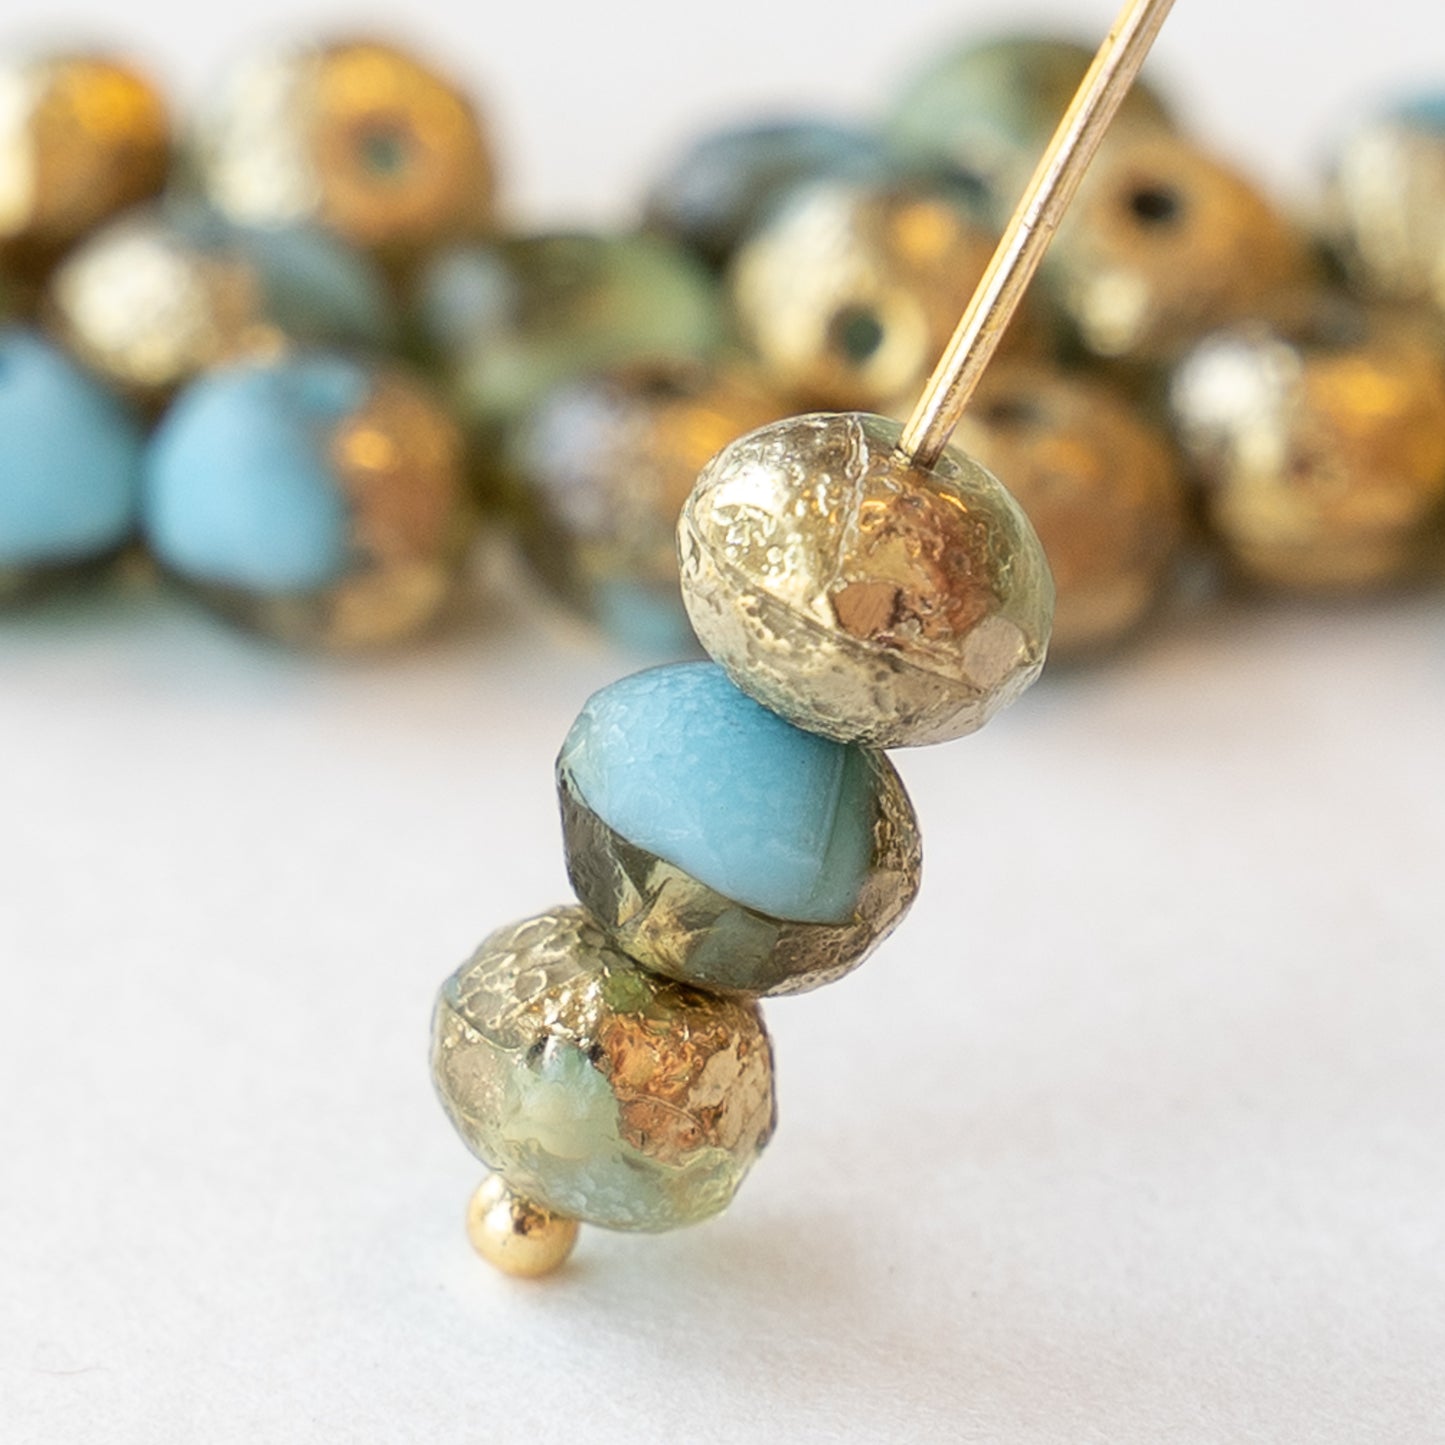 5x7mm Rondelle Beads - Blue with Gold Etched Finish - 25 beads